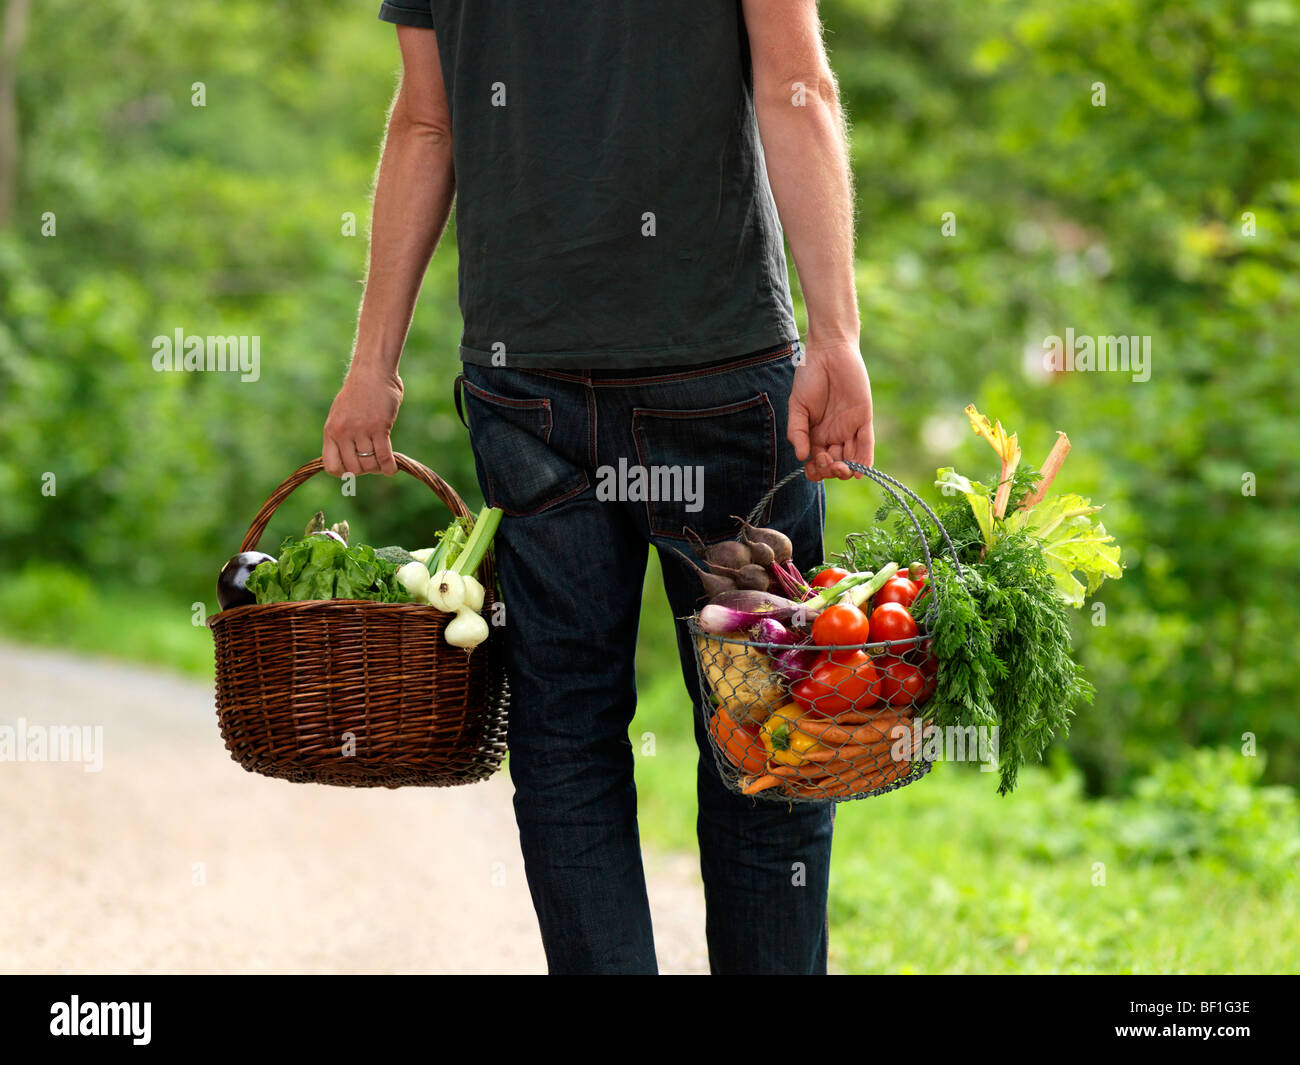 A man carrying baskets full of vegetables, Sweden Stock Photo - Alamy